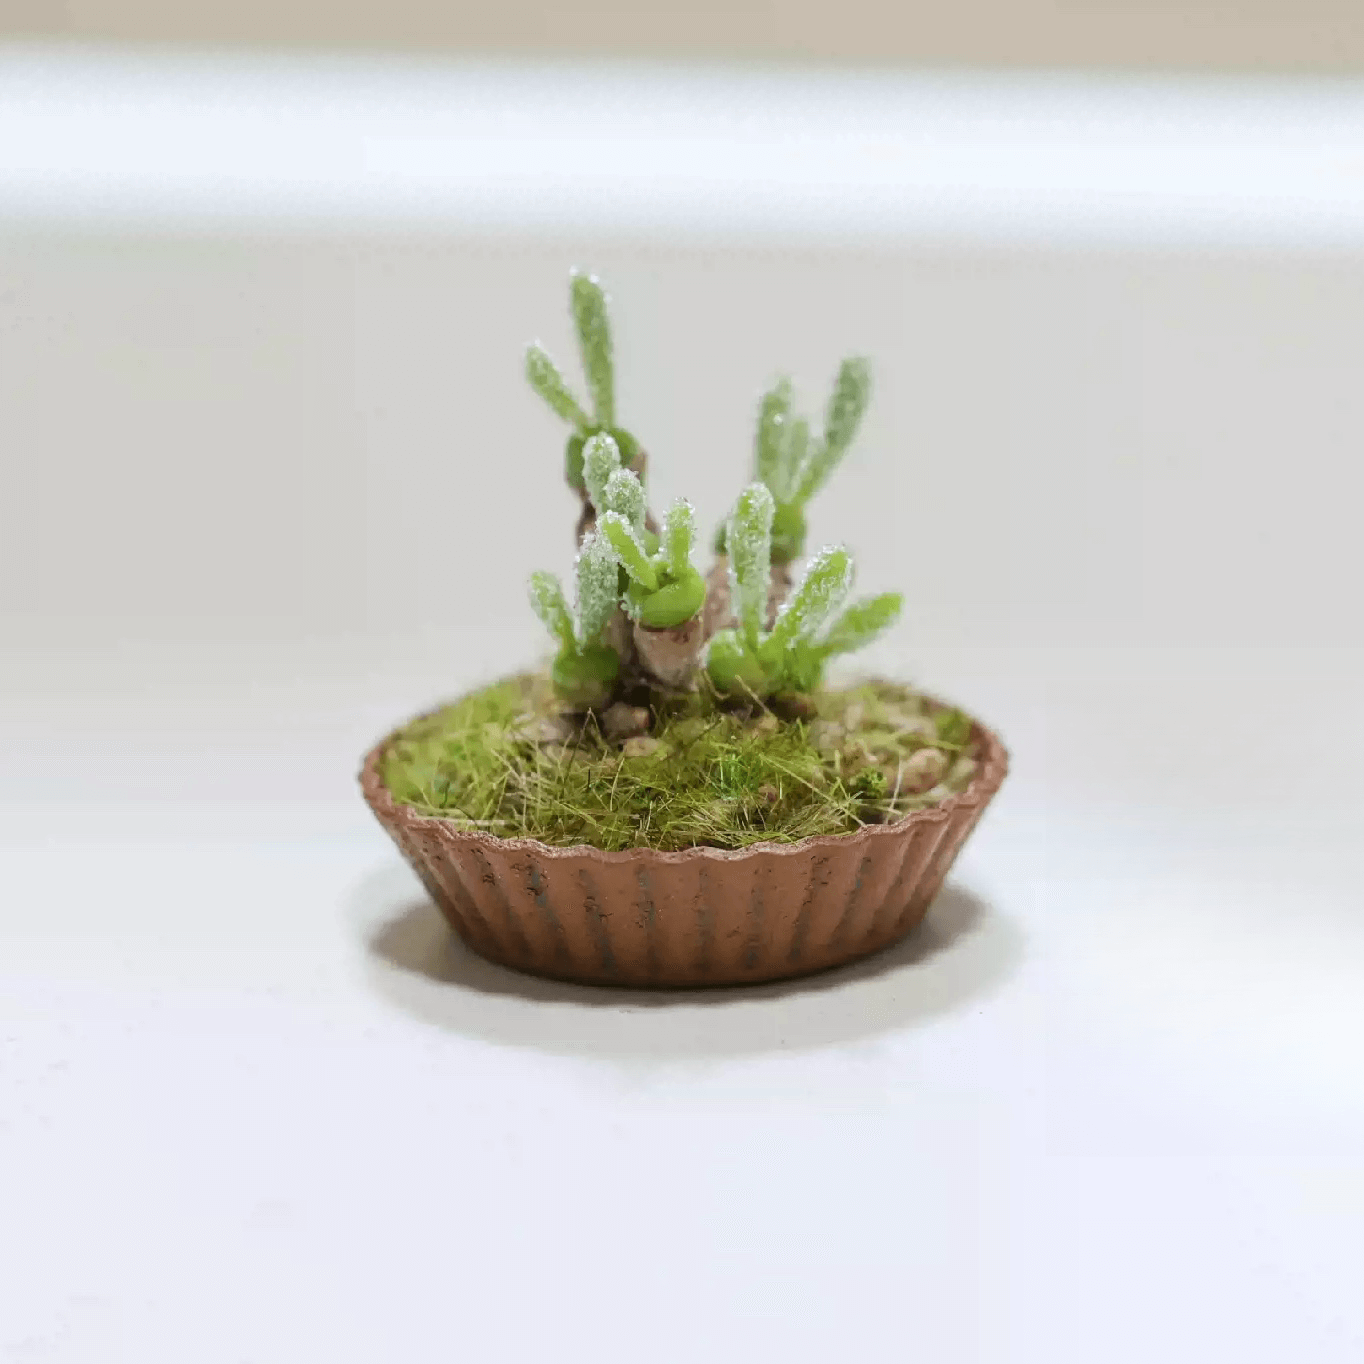 Monilaria Moniliforme as known as bunny succulents, it is a smallish clump-forming succulent plant that has both succulent leaves and stems.  Material: Handmade from Clay